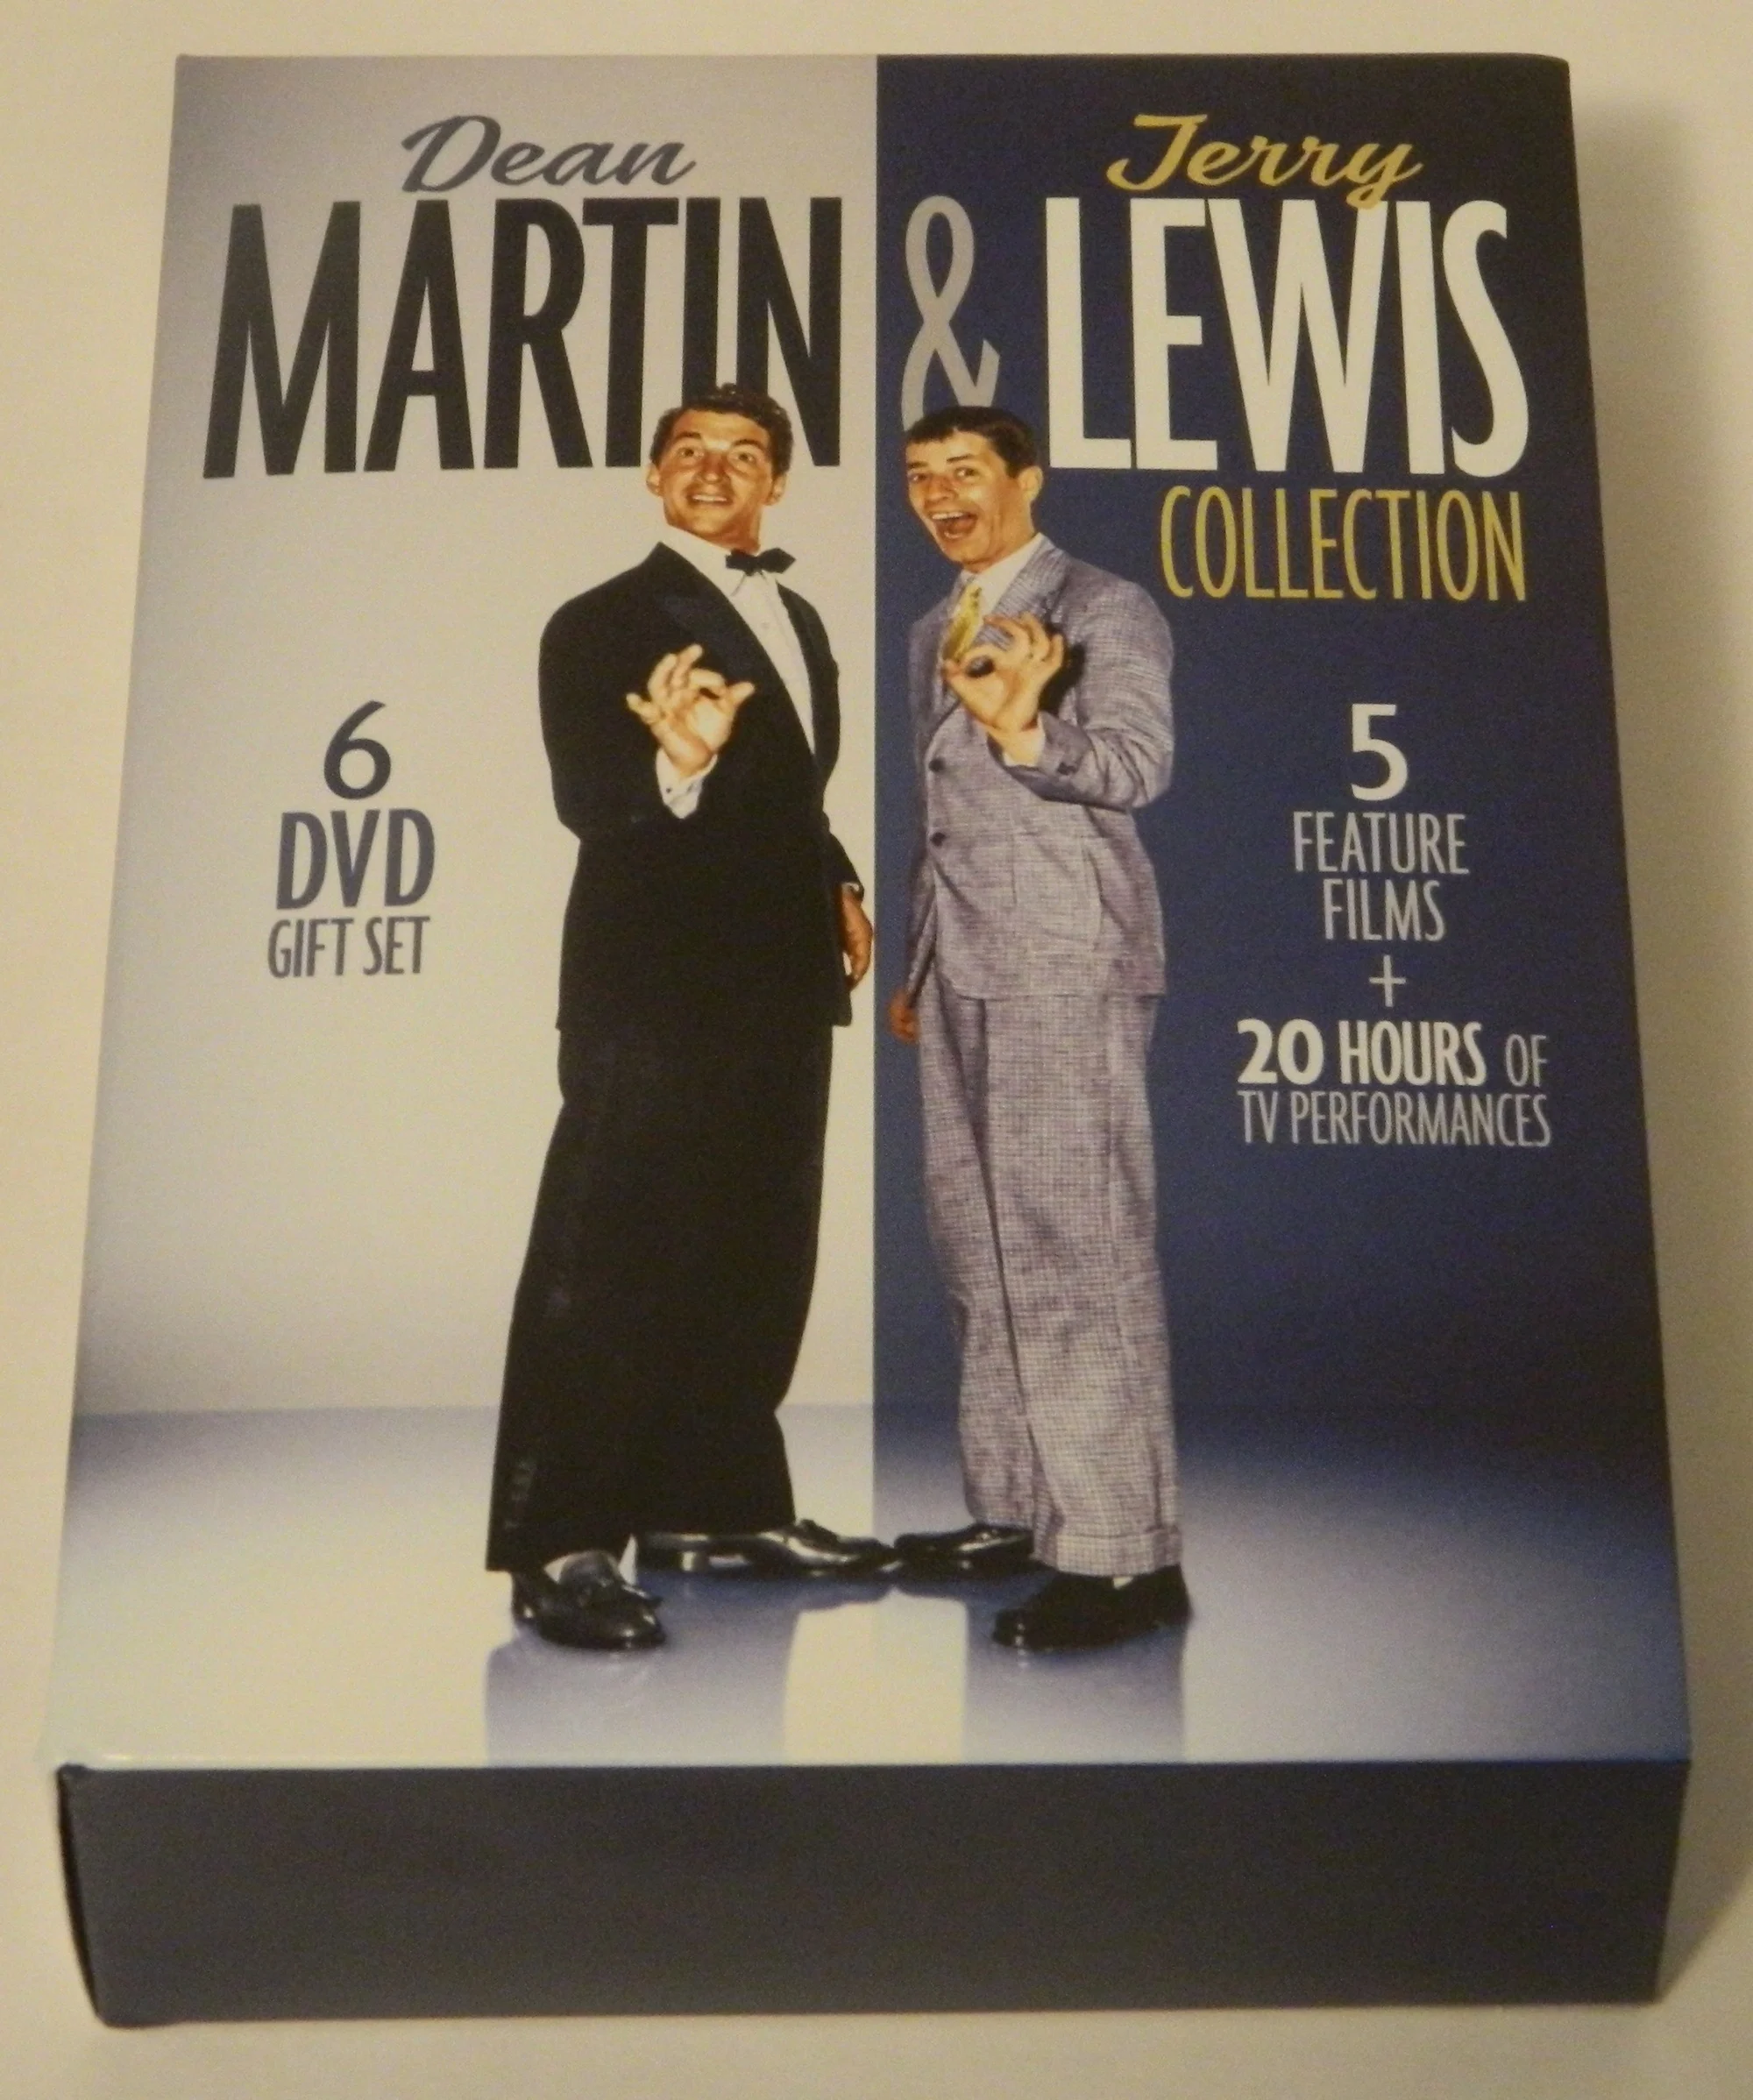 Dean Martin and Jerry Lewis Collection DVD